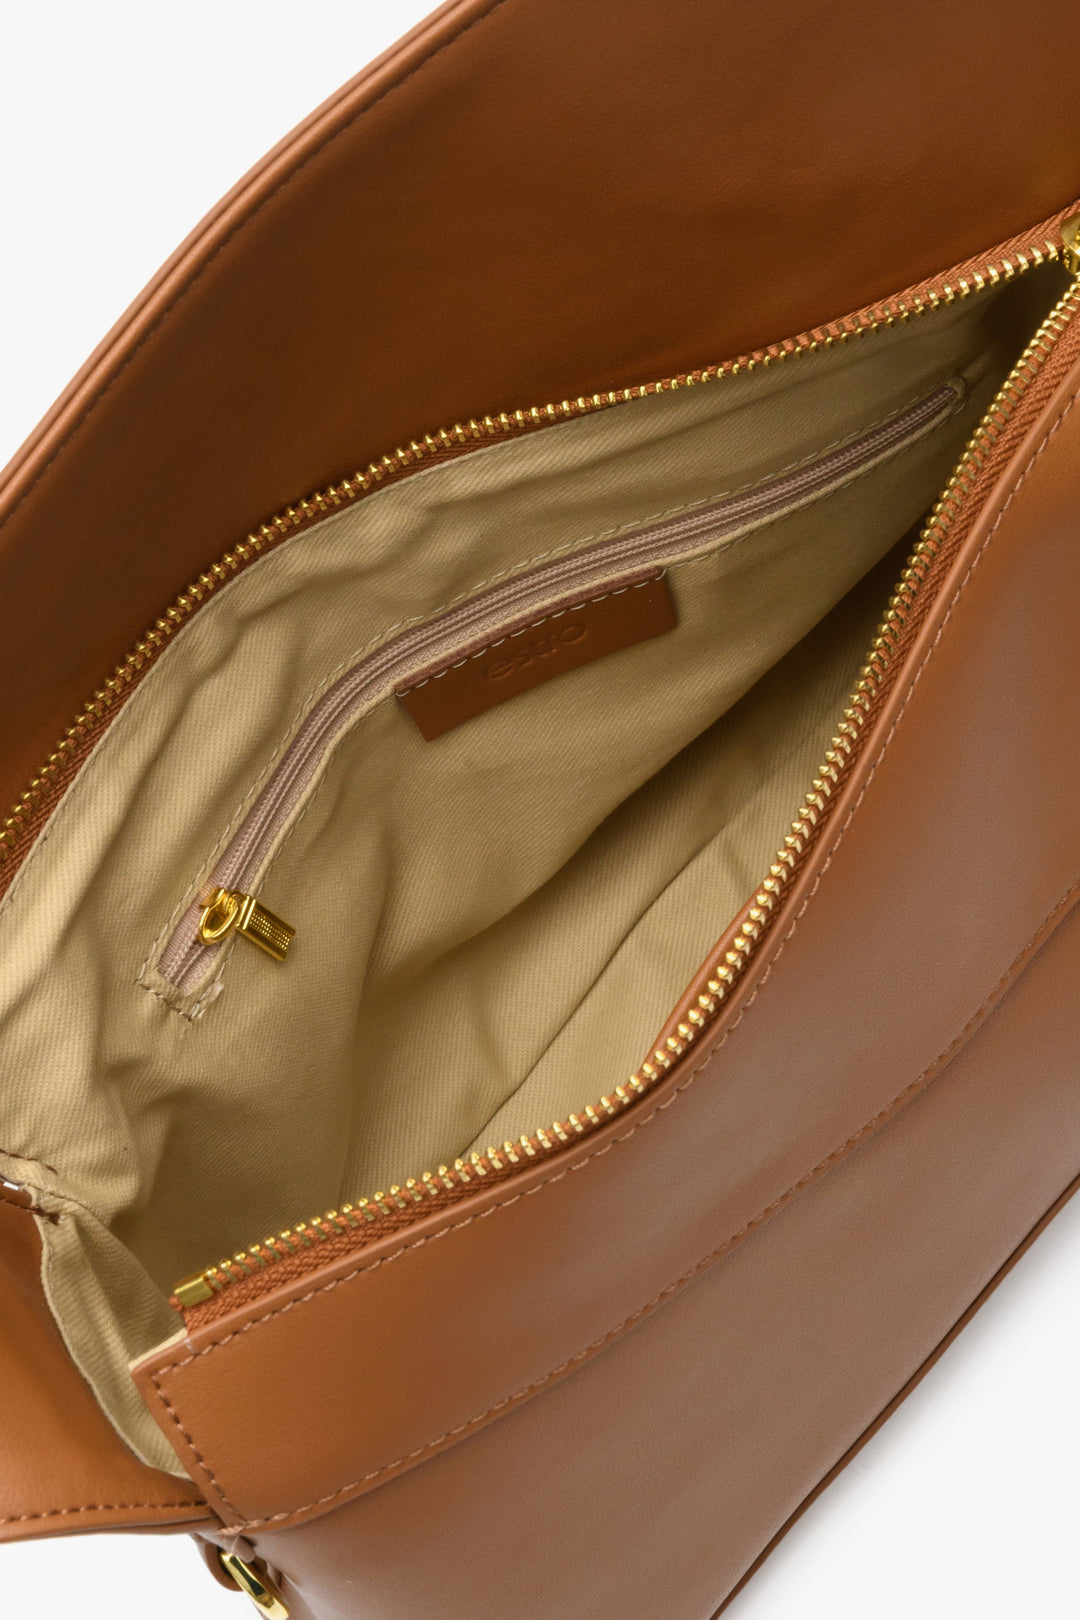 Women's leather brown handbag by Estro - close-up on the interior.